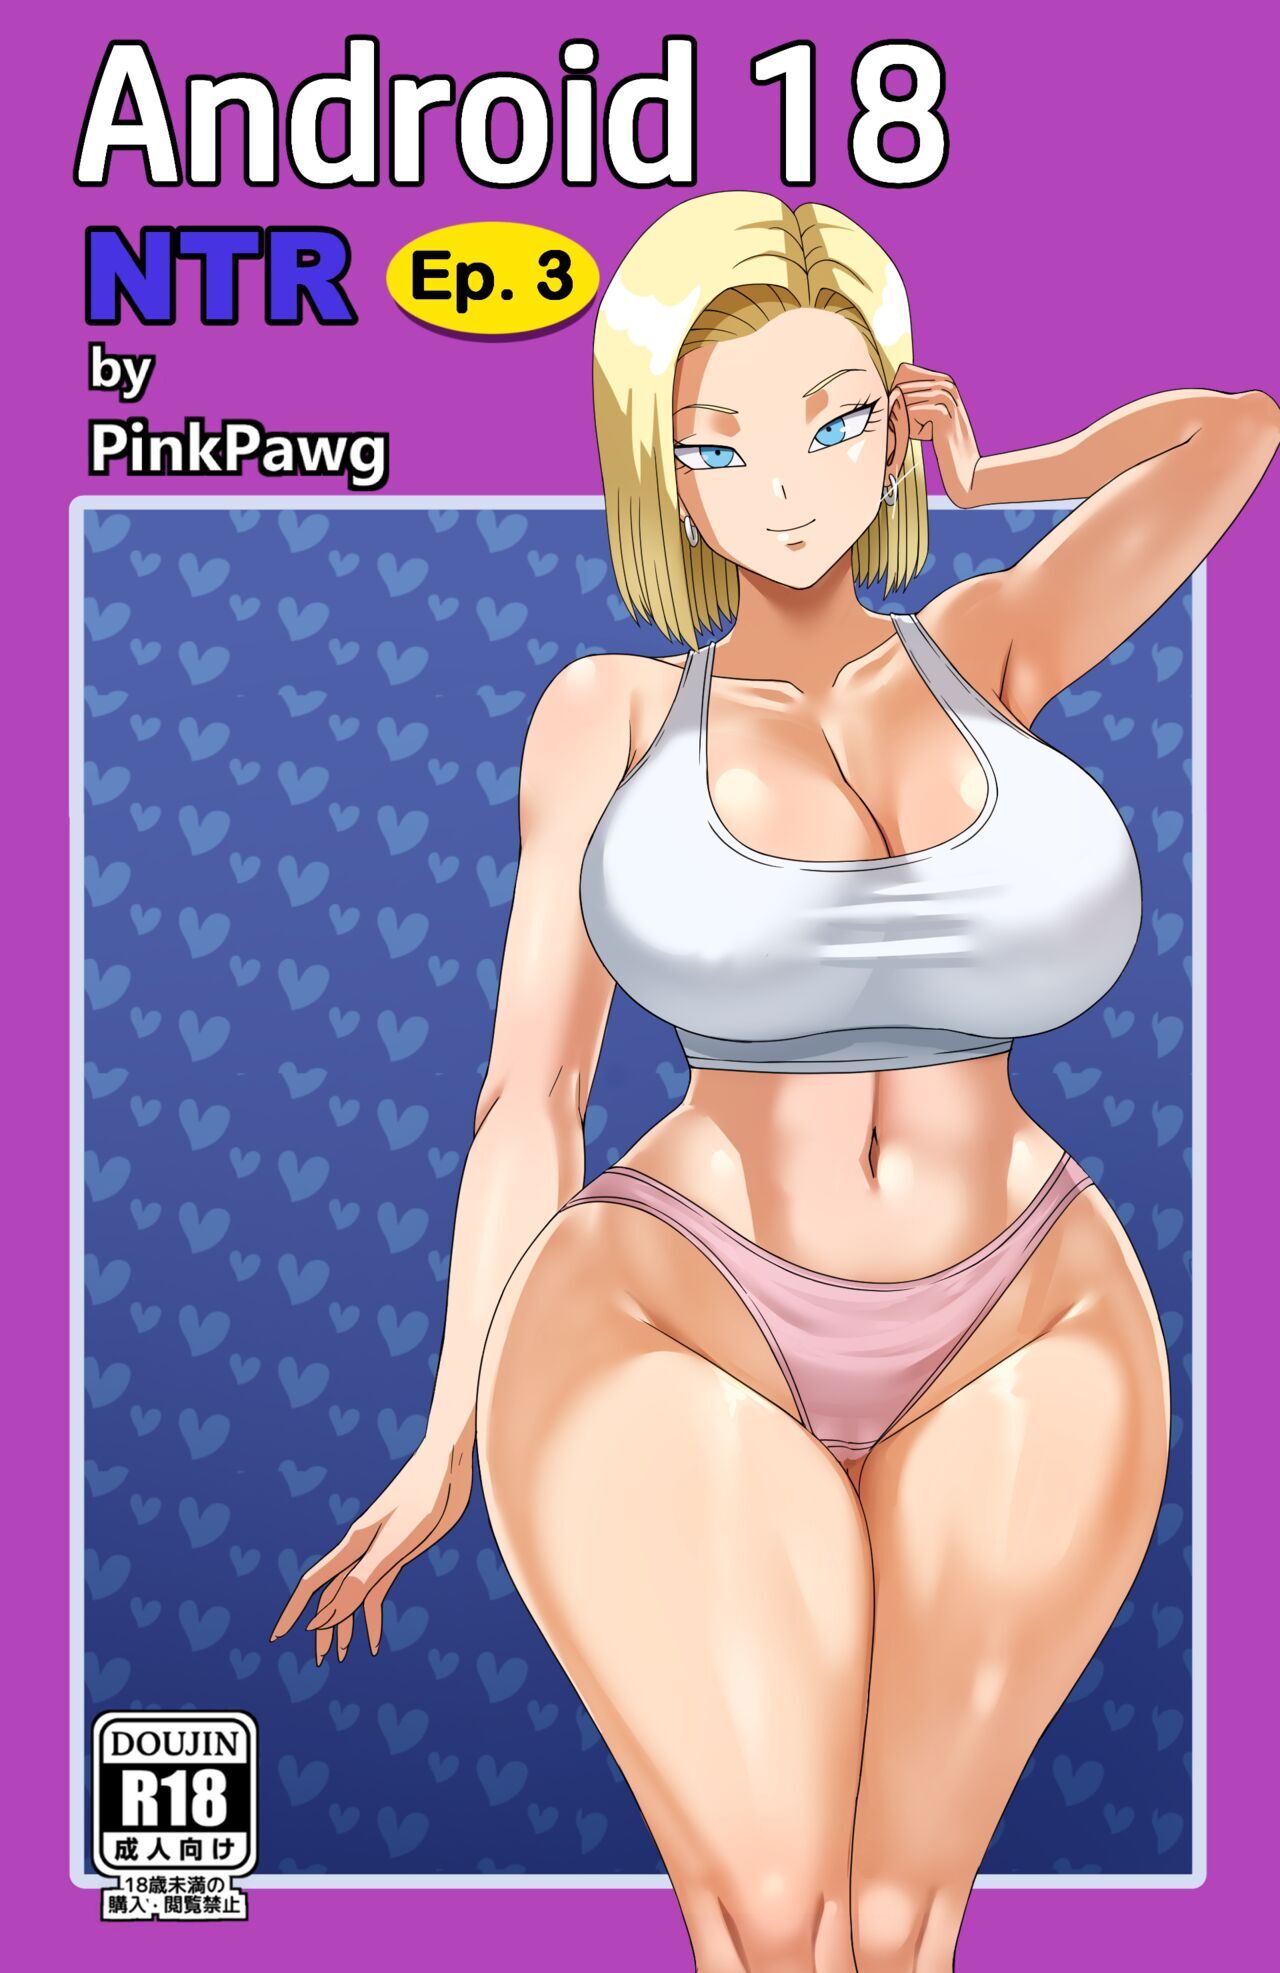 Android 18 - sorted by number of objects - Free Hentai